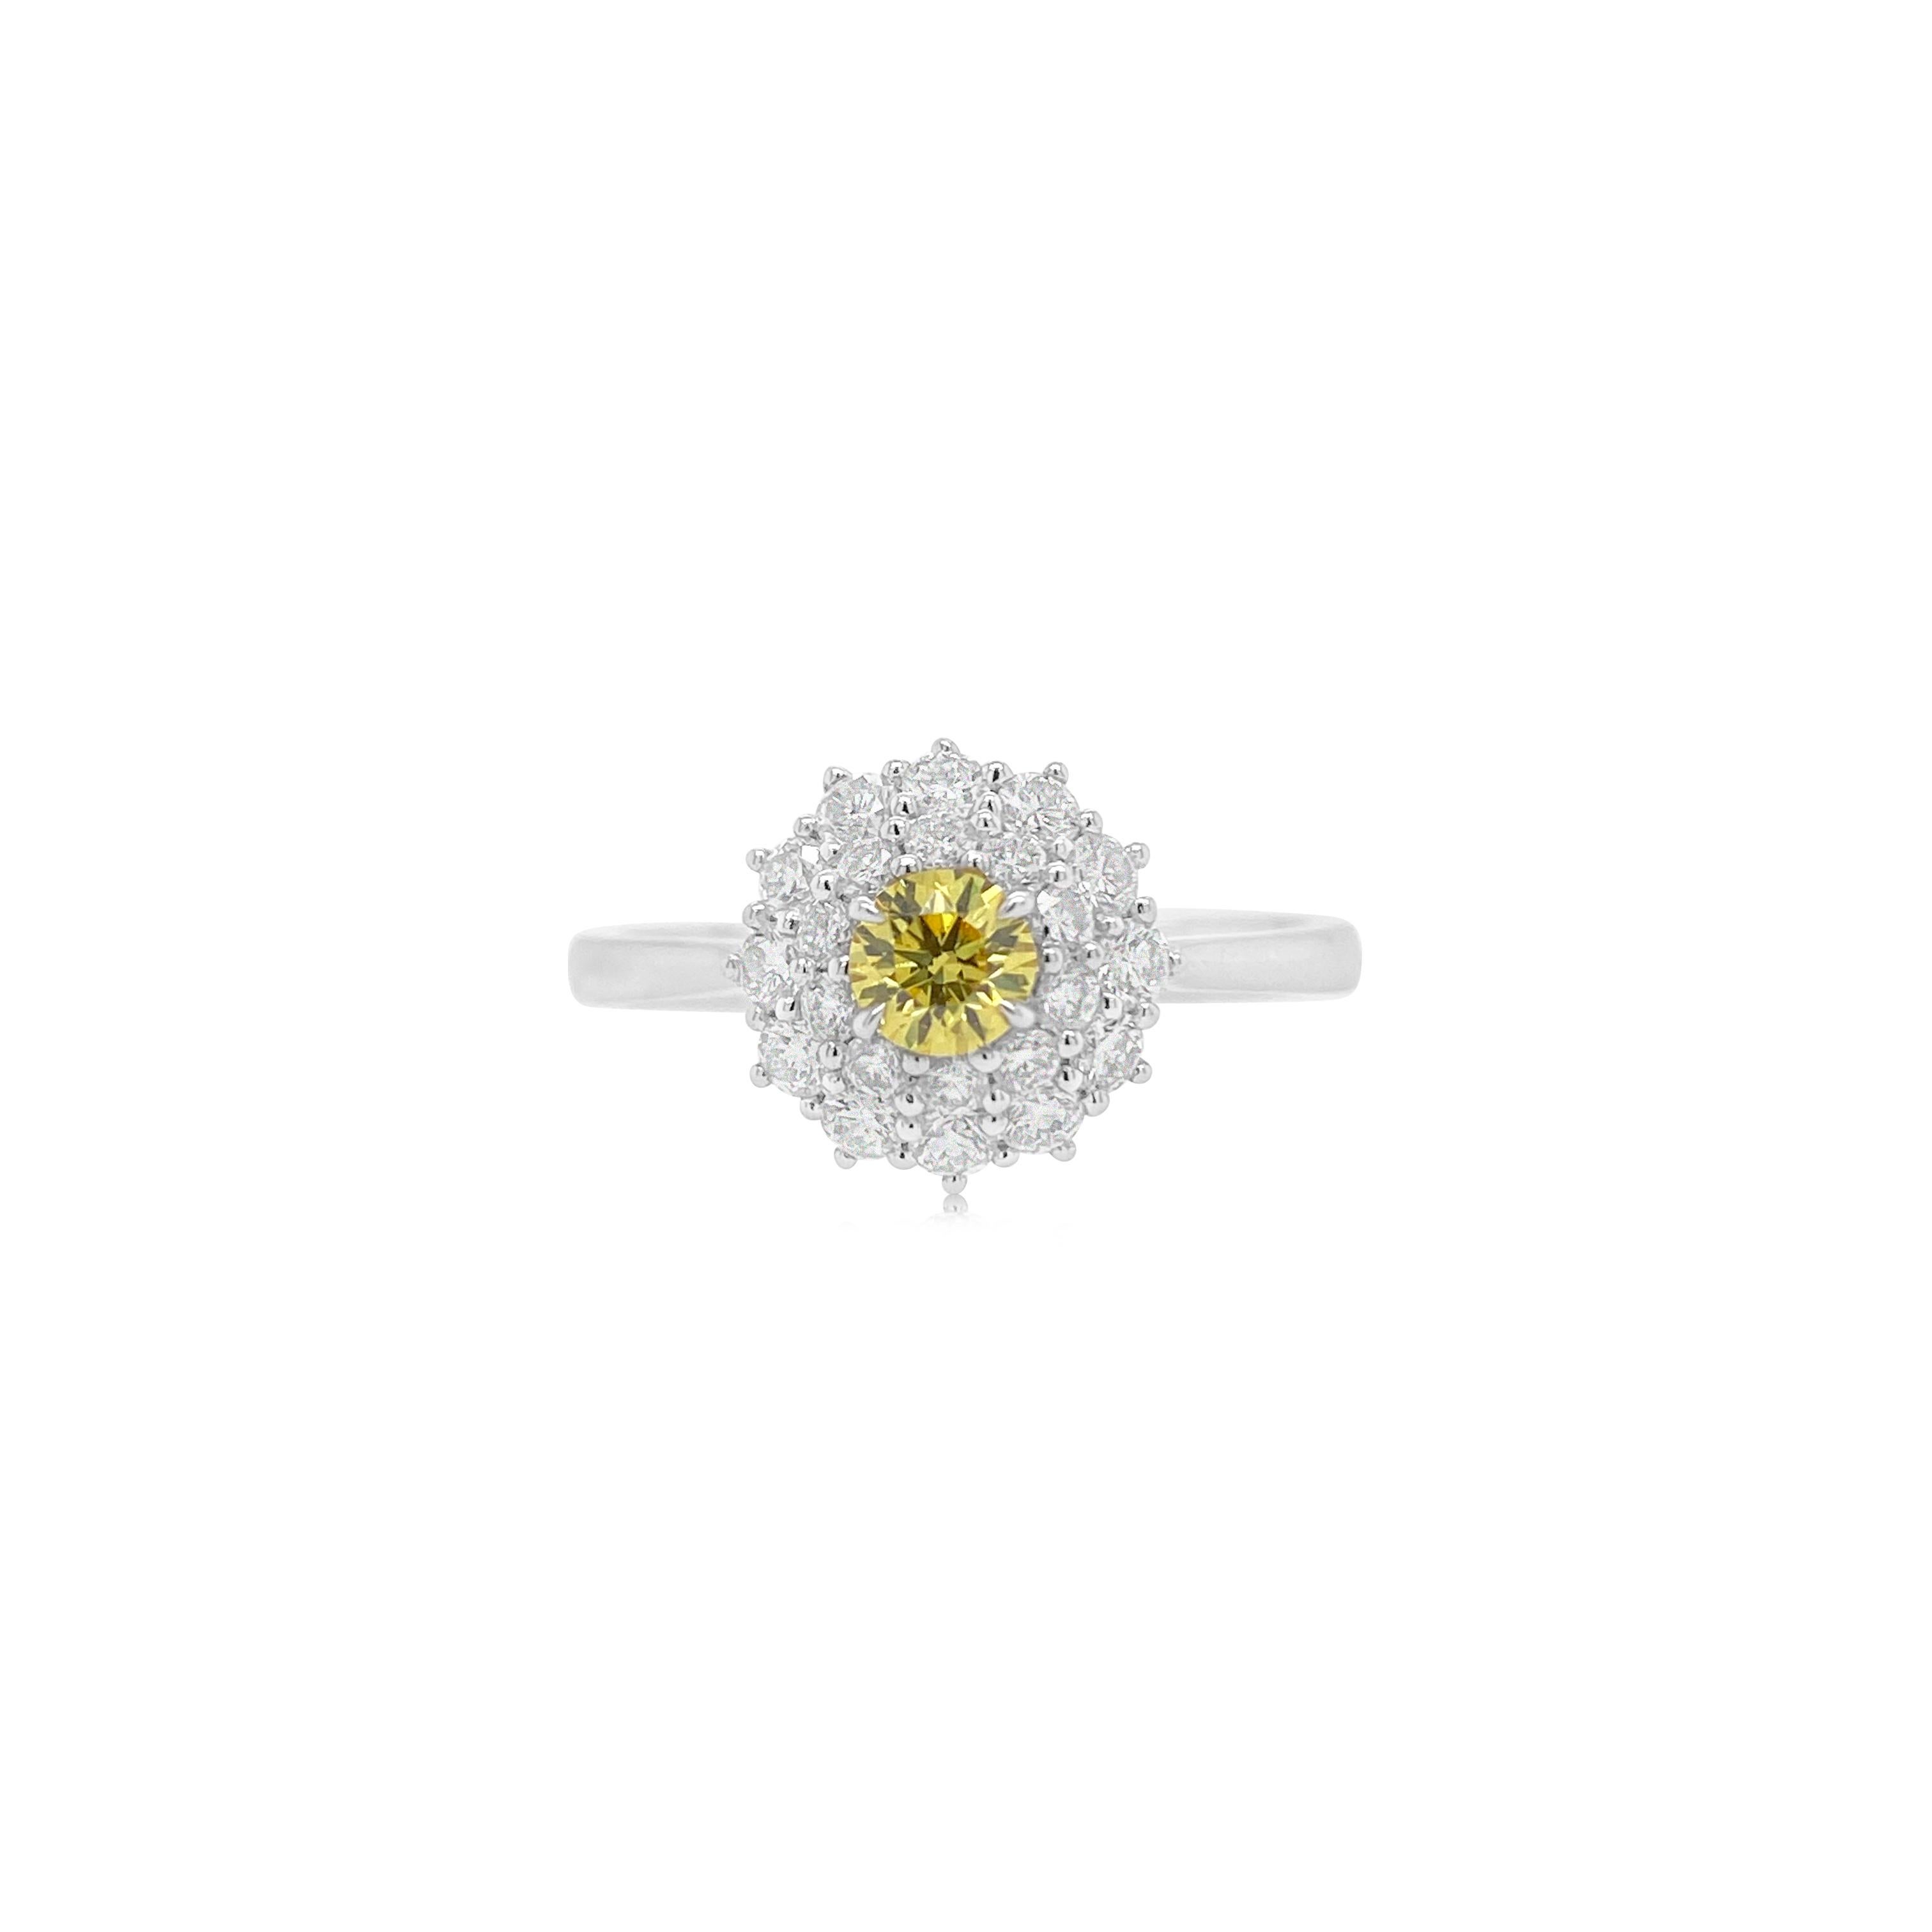 This ring has a rare combination of Natural Fancy Vivid Yellow diamond enclosed in a layered setting of white rose-cut diamonds. 
A beautiful rendition of color and shapes.
-	Centre Diamond is CGL Lab Certified Fancy Vivid Yellow diamond – 0.235